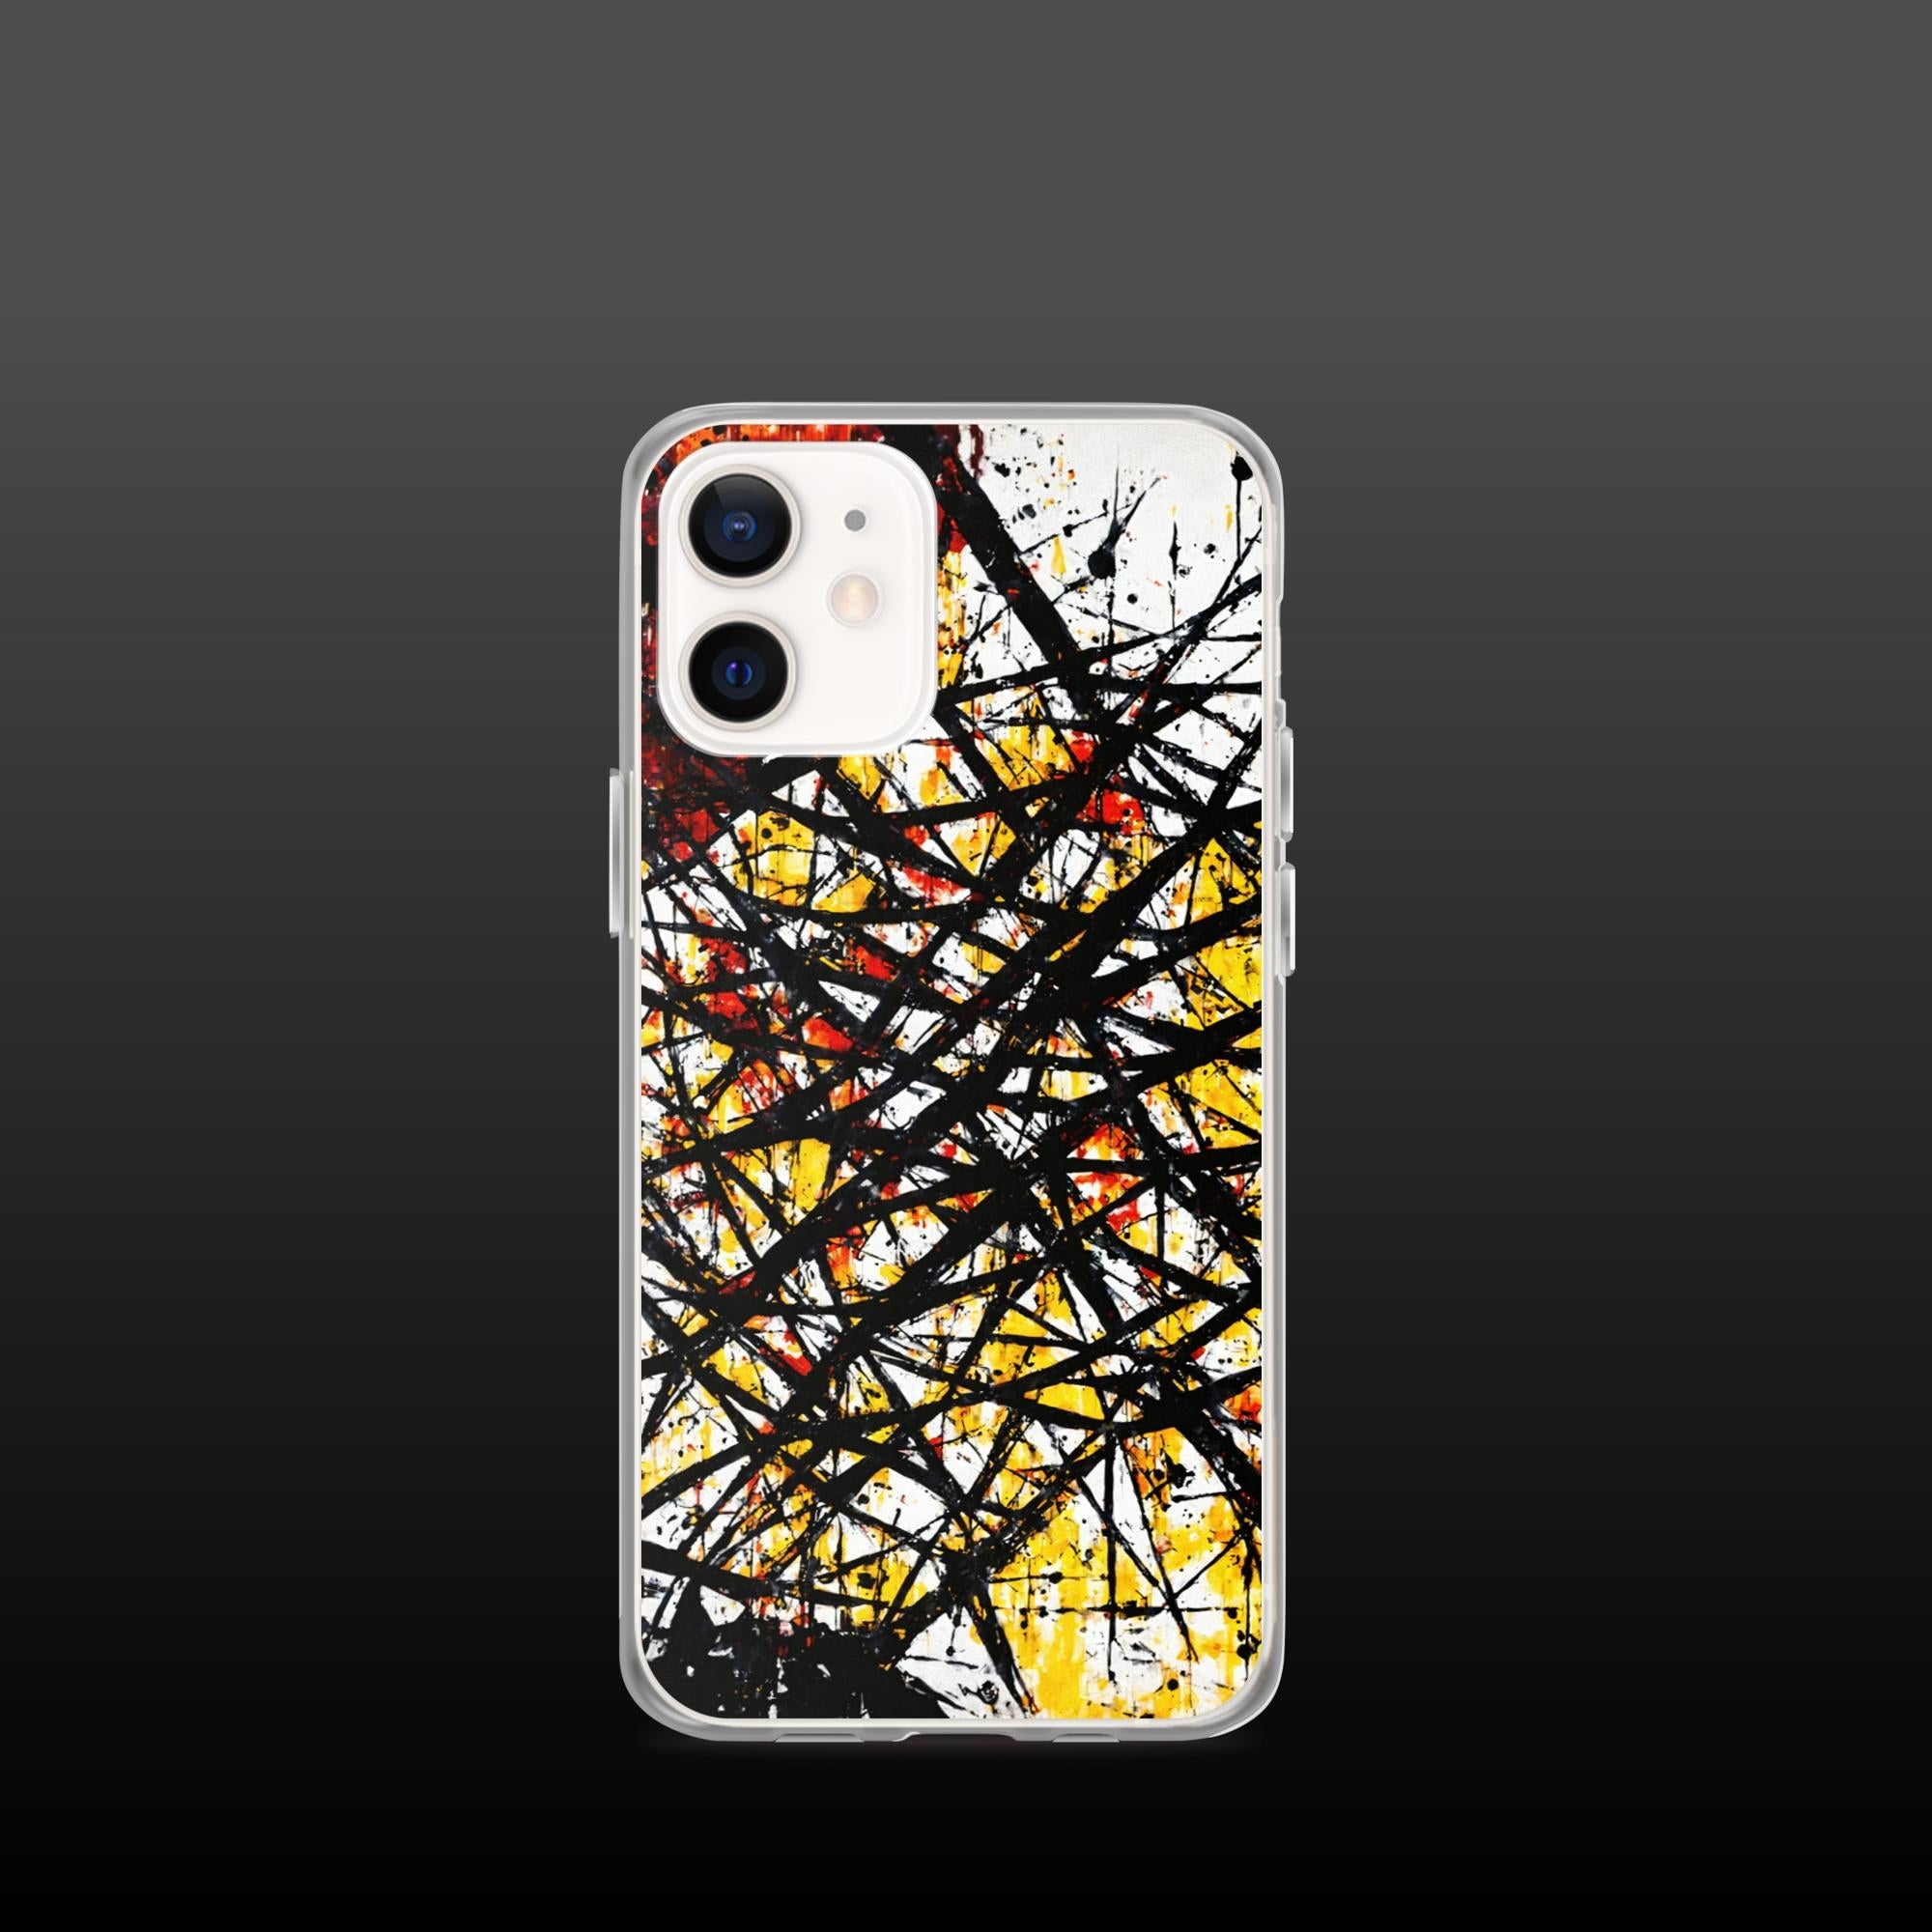 "Unyielding emotions" clear iphone case - Clear iphone case - Ever colorful